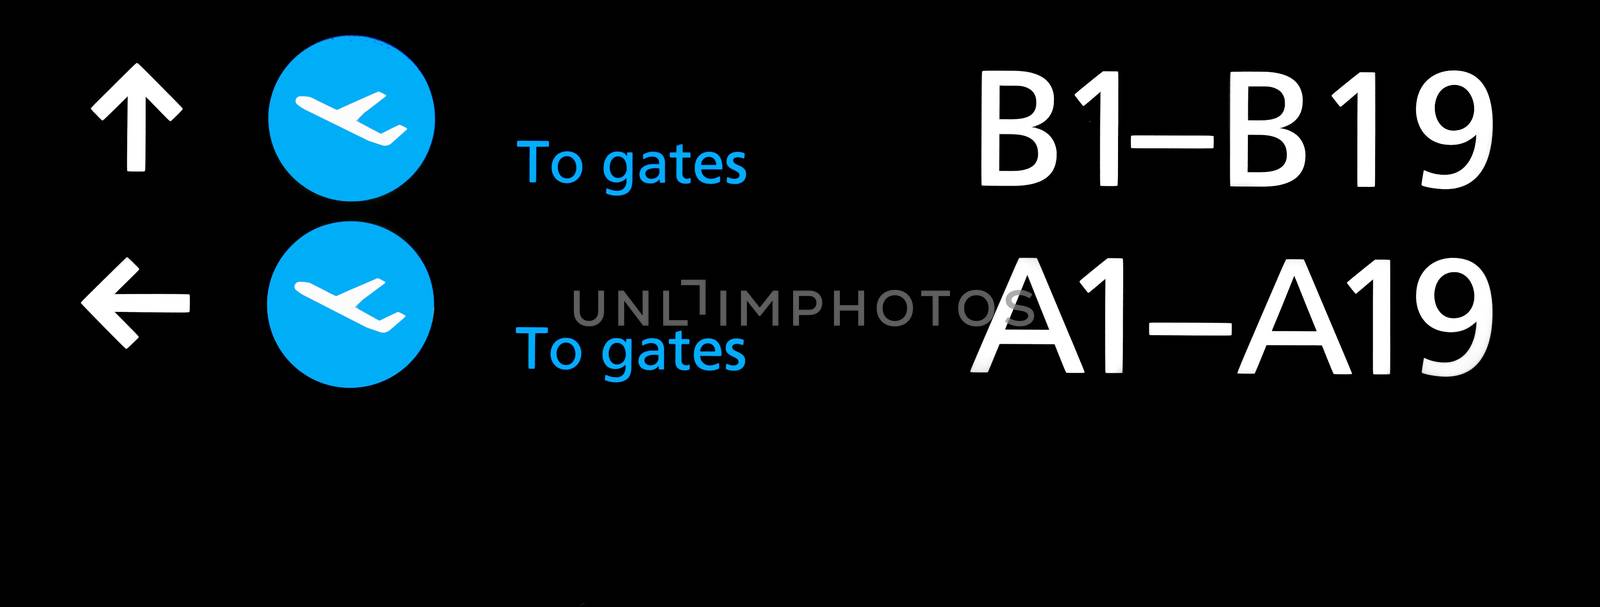 Black airport terminal sign with blue symbols by svedoliver